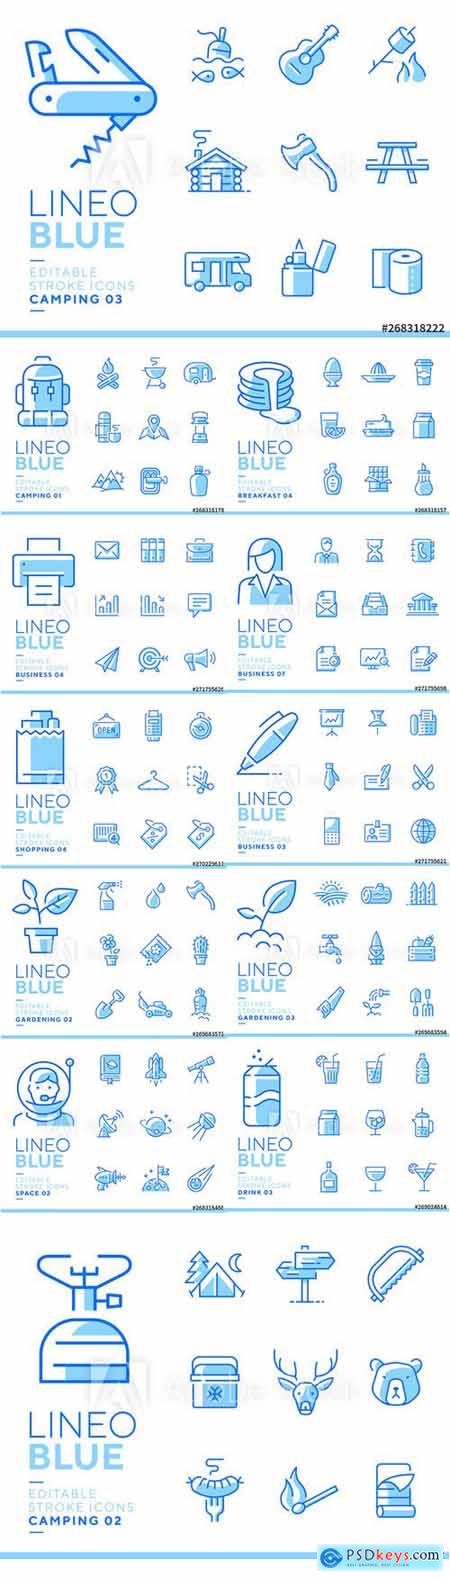 Lineo Blue - Line Icons Pack Vol 2